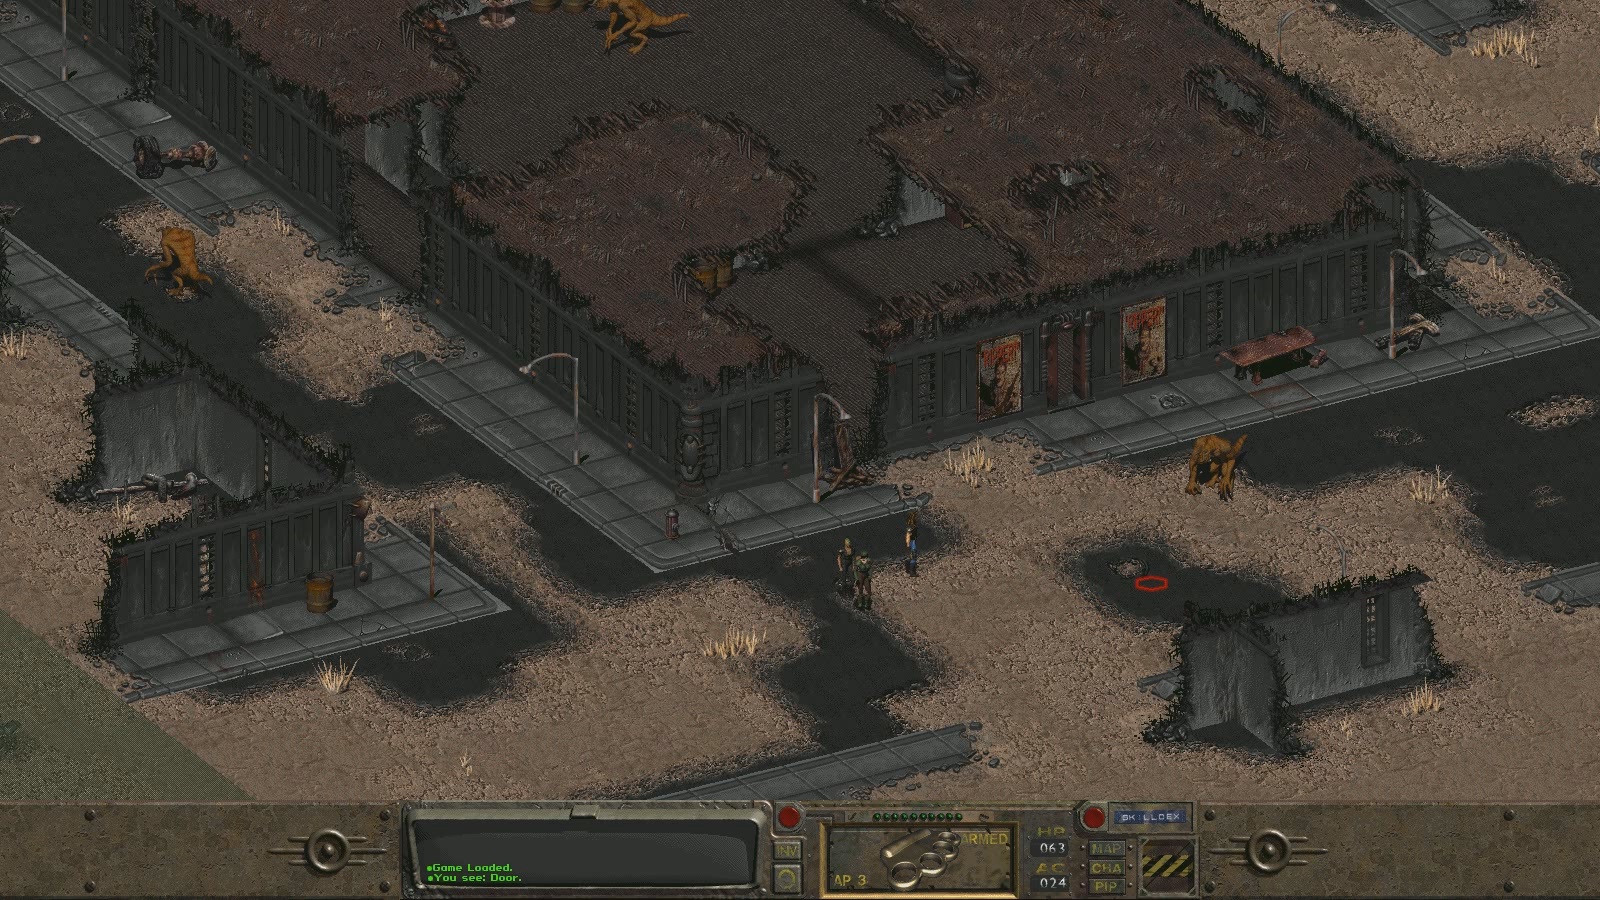 Fallout 1 играть. Фоллаут 1997. Fallout 1. Фоллаут 1 геймплей. Fallout 1 ps1.